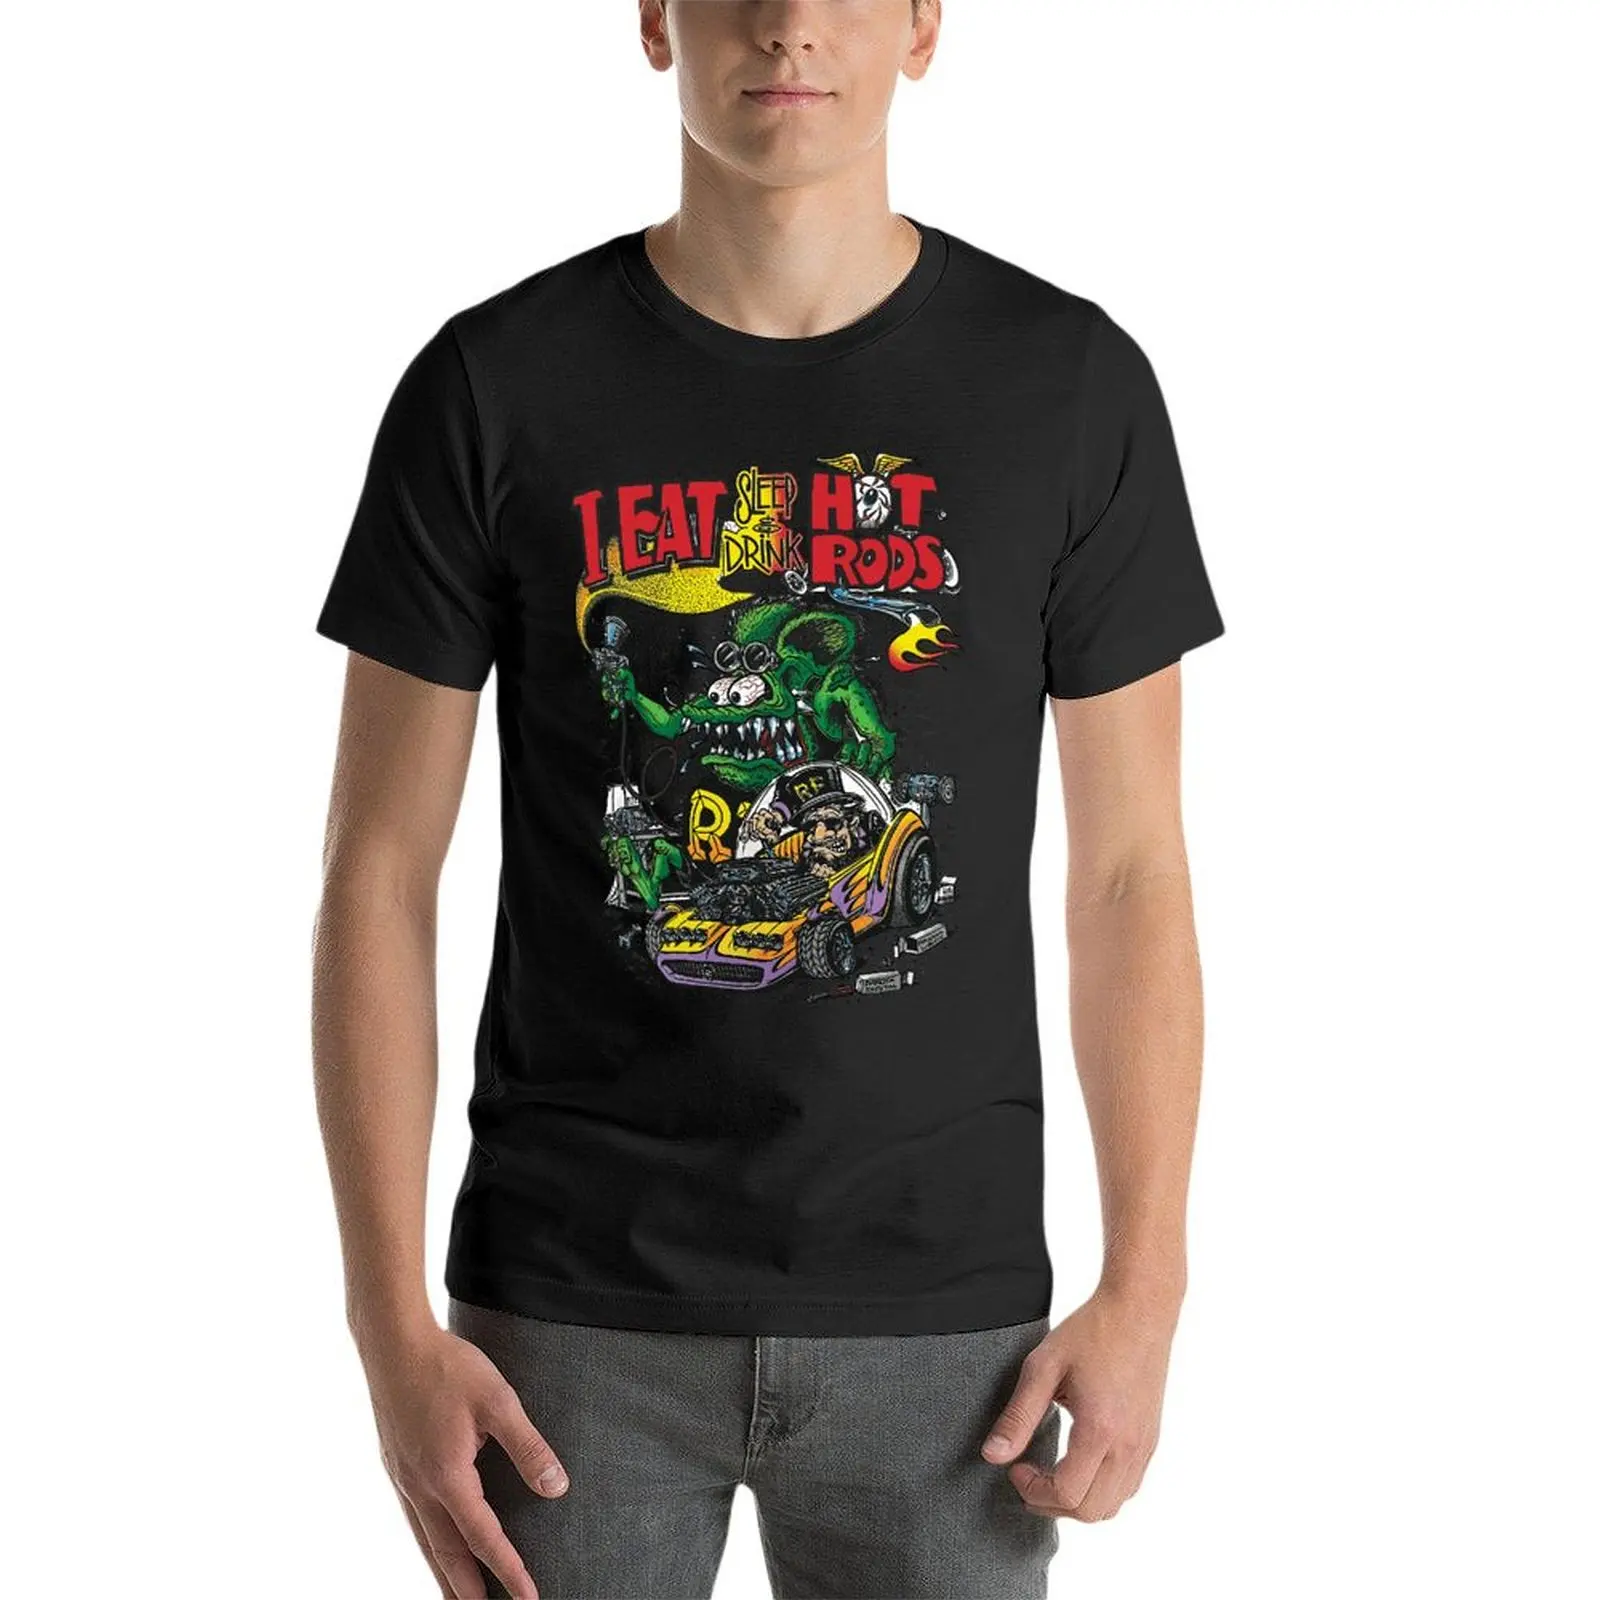 

Ed Big Daddy Roth Rat Fink Eat Drink Hotrods Oversized T-Shirts Fashion Mens Clothing 100% Cotton Streetwear Big Size Top Tee